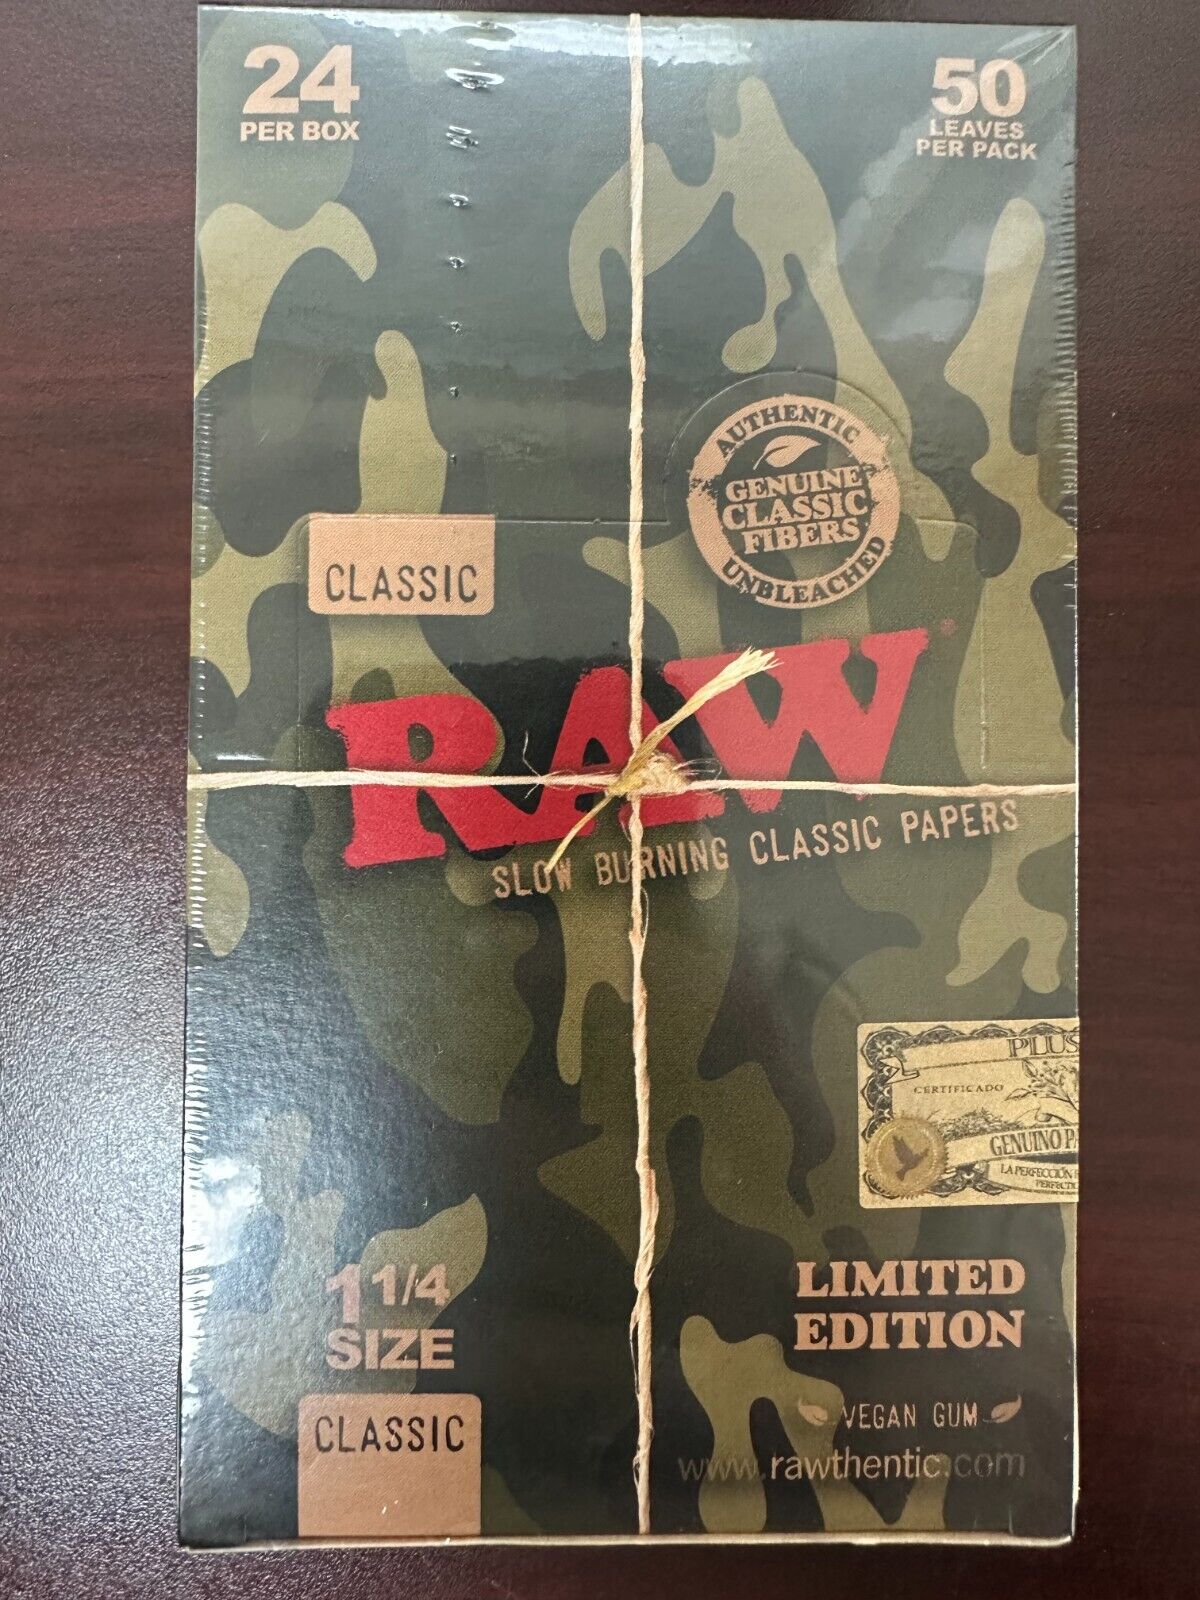 RAW Rolling Papers CLASSIC CAMO - 1¼ Papers - LIMITED EDITION FULL BOX 24PKS